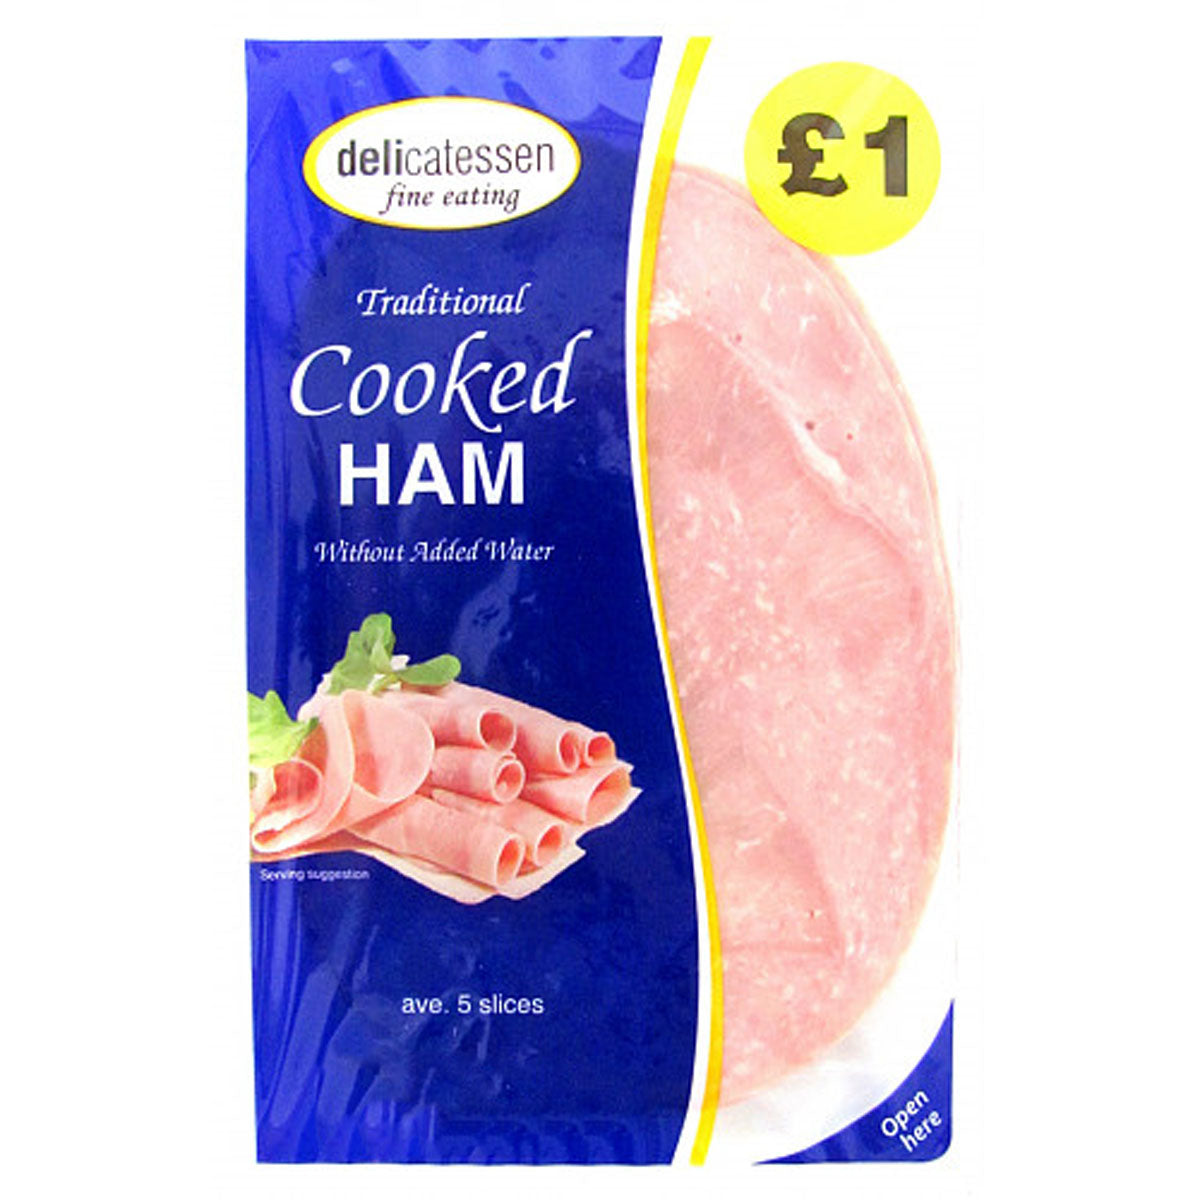 Delicatessen - Fine Eating Traditional Cooked Ham - 90g - Continental Food Store